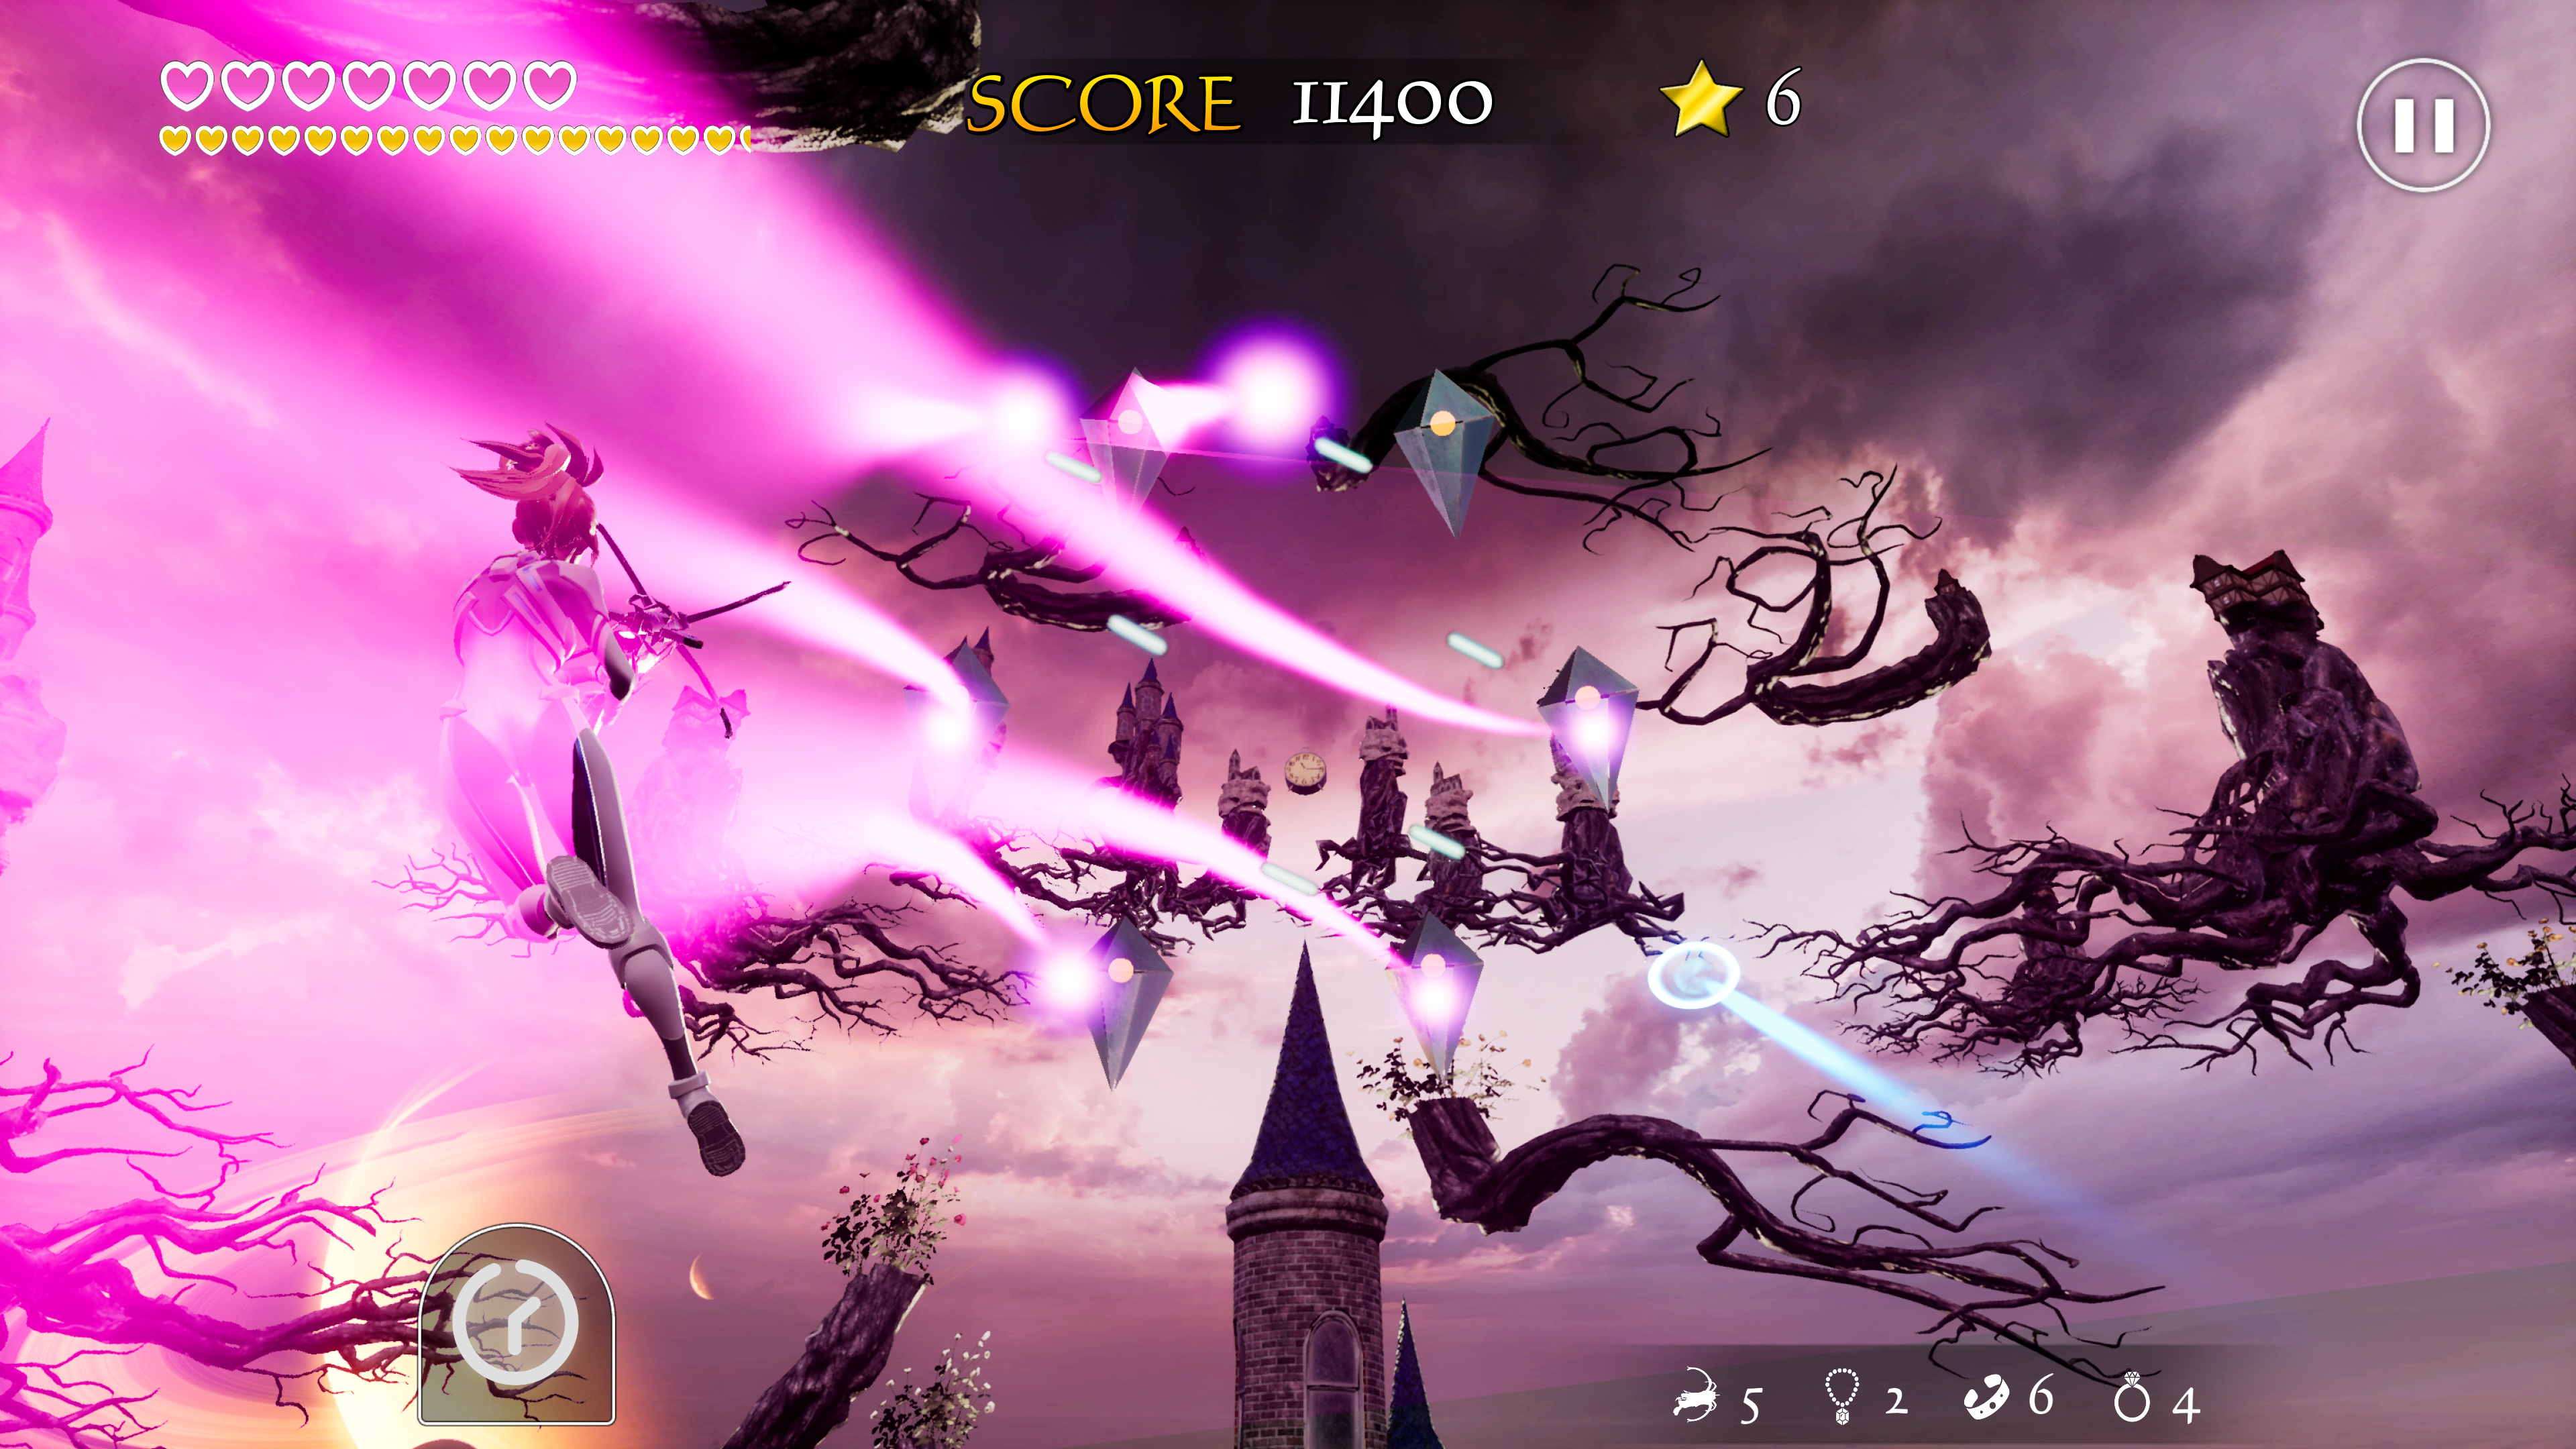 A flying character shoots geometric enemies in Air Twister.